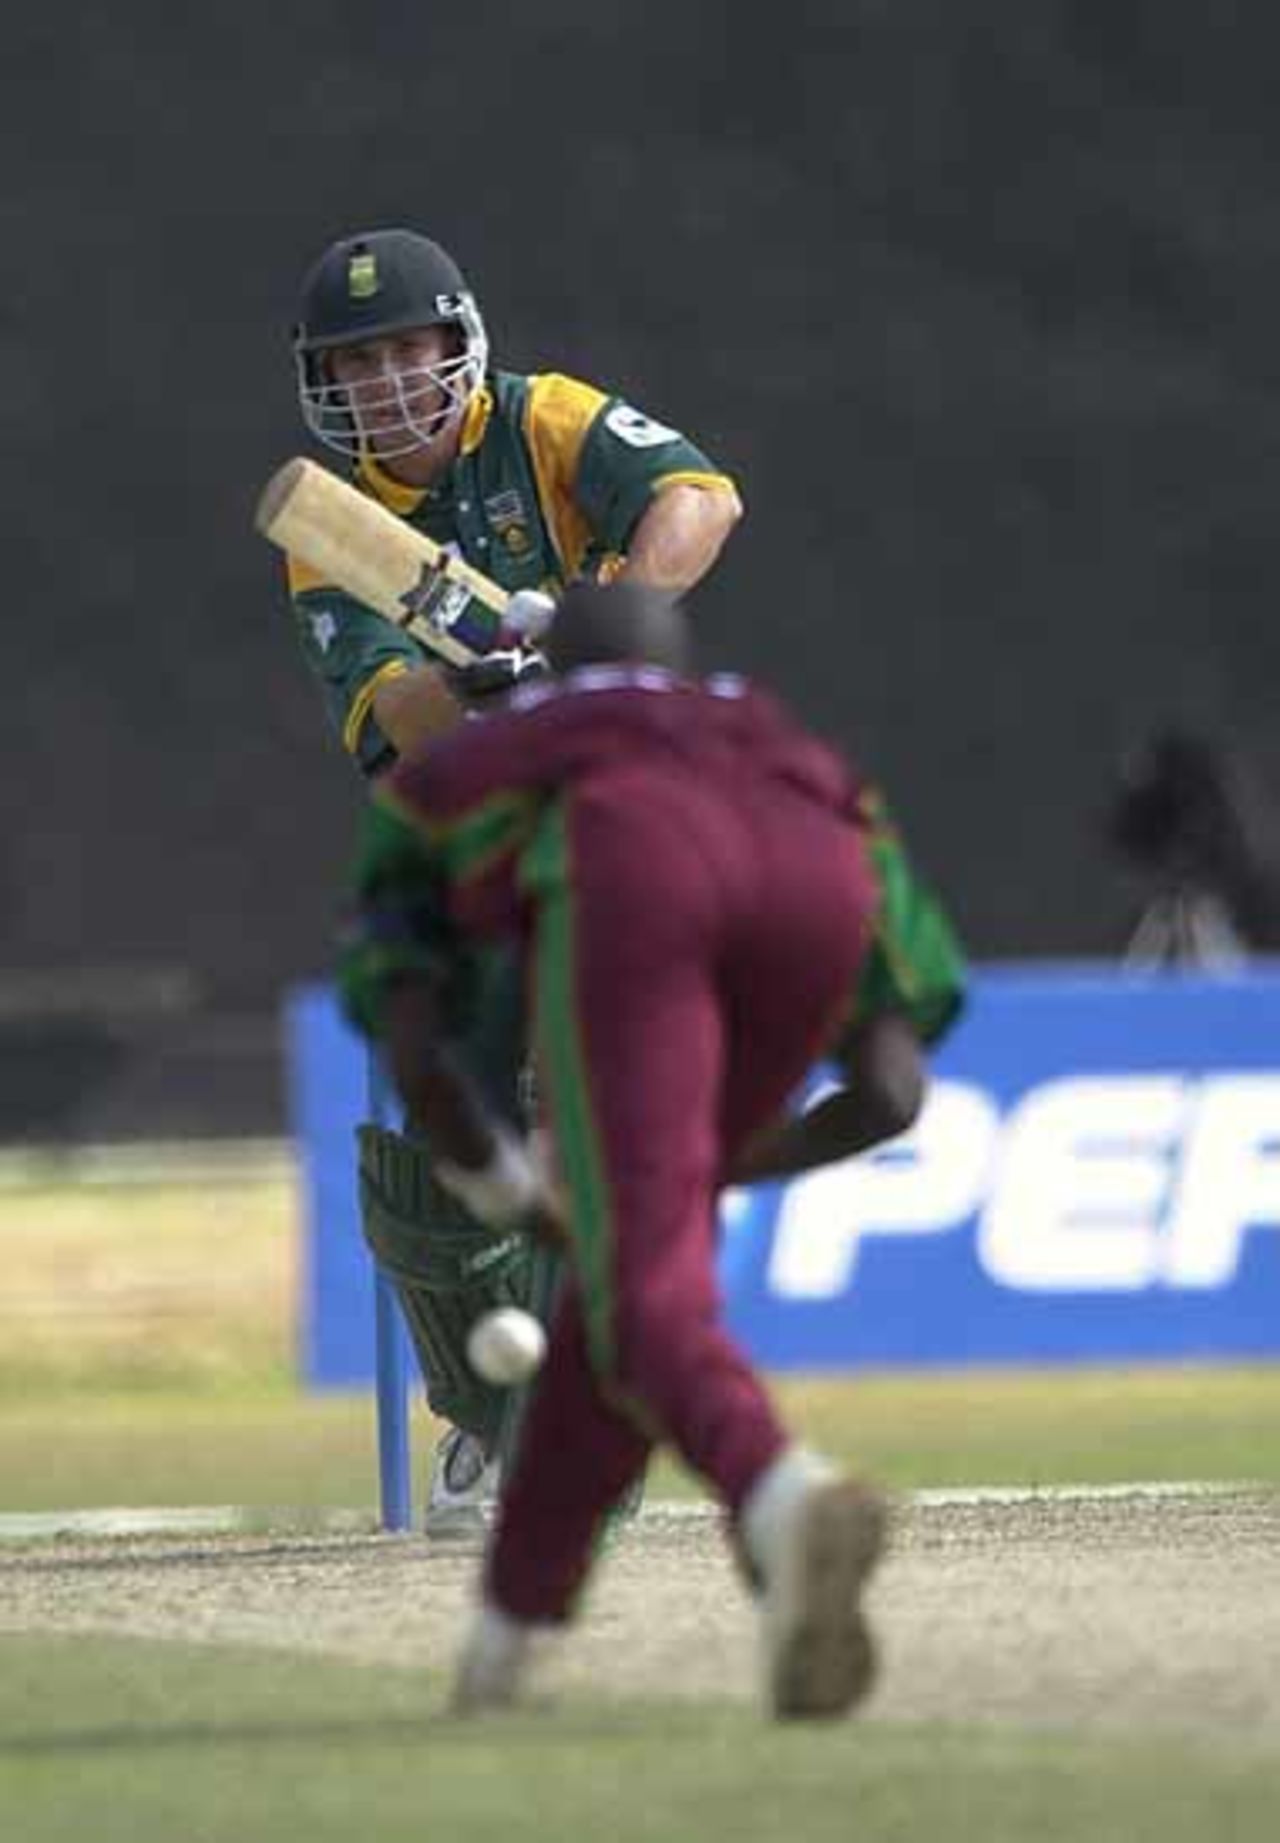 ICC Champions Trophy, South Africa v West Indies, 13th September 2002, Colombo (SSC)